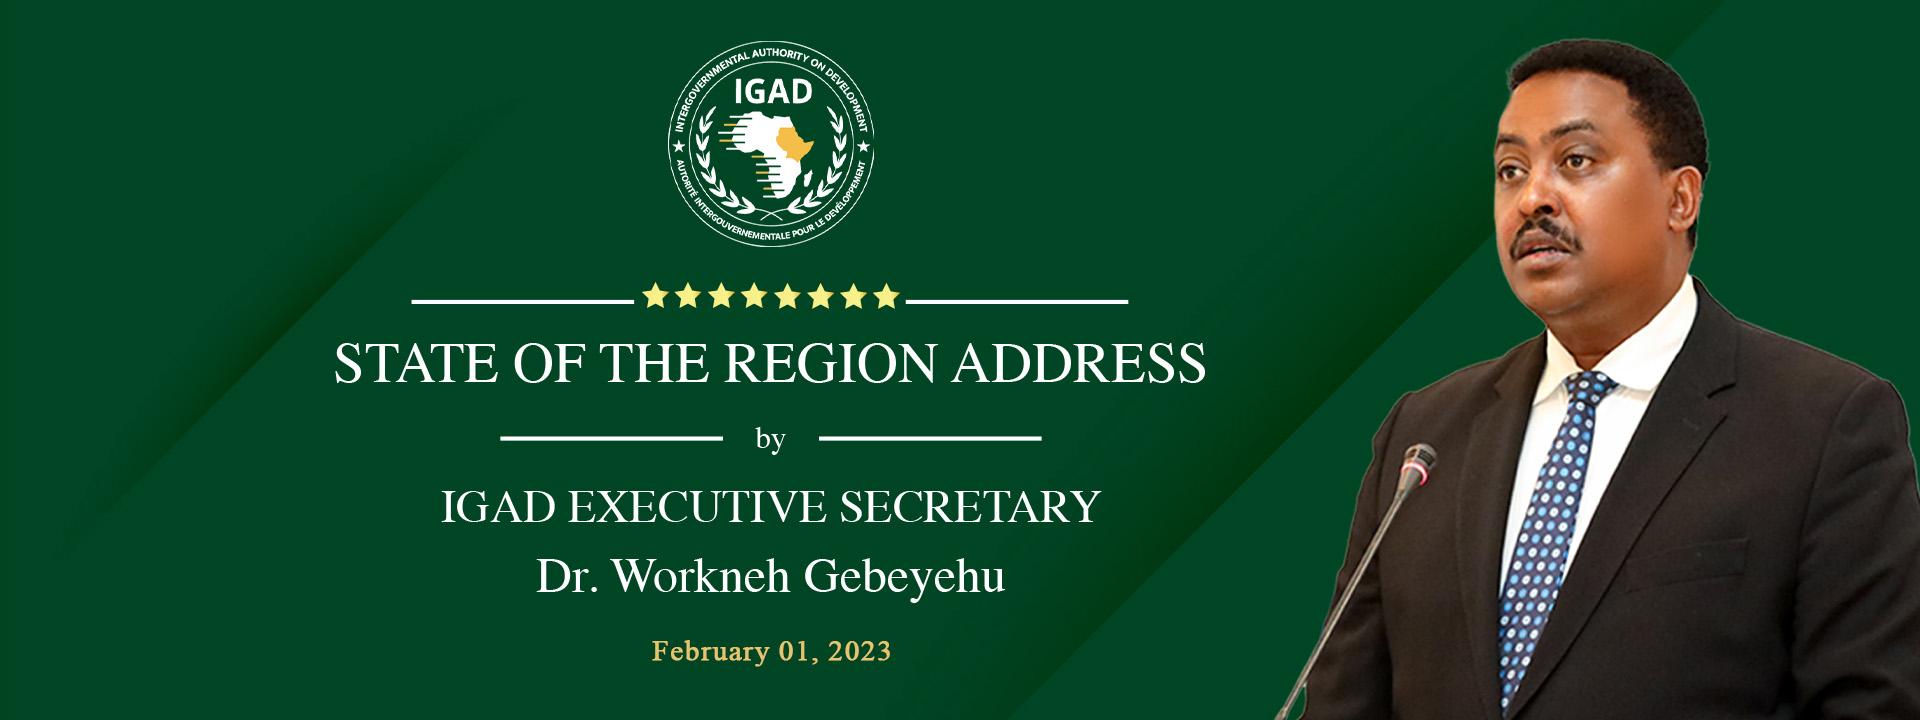 State of The Region Address by IGAD Executive Secretary Dr. Workneh Gebeyehu